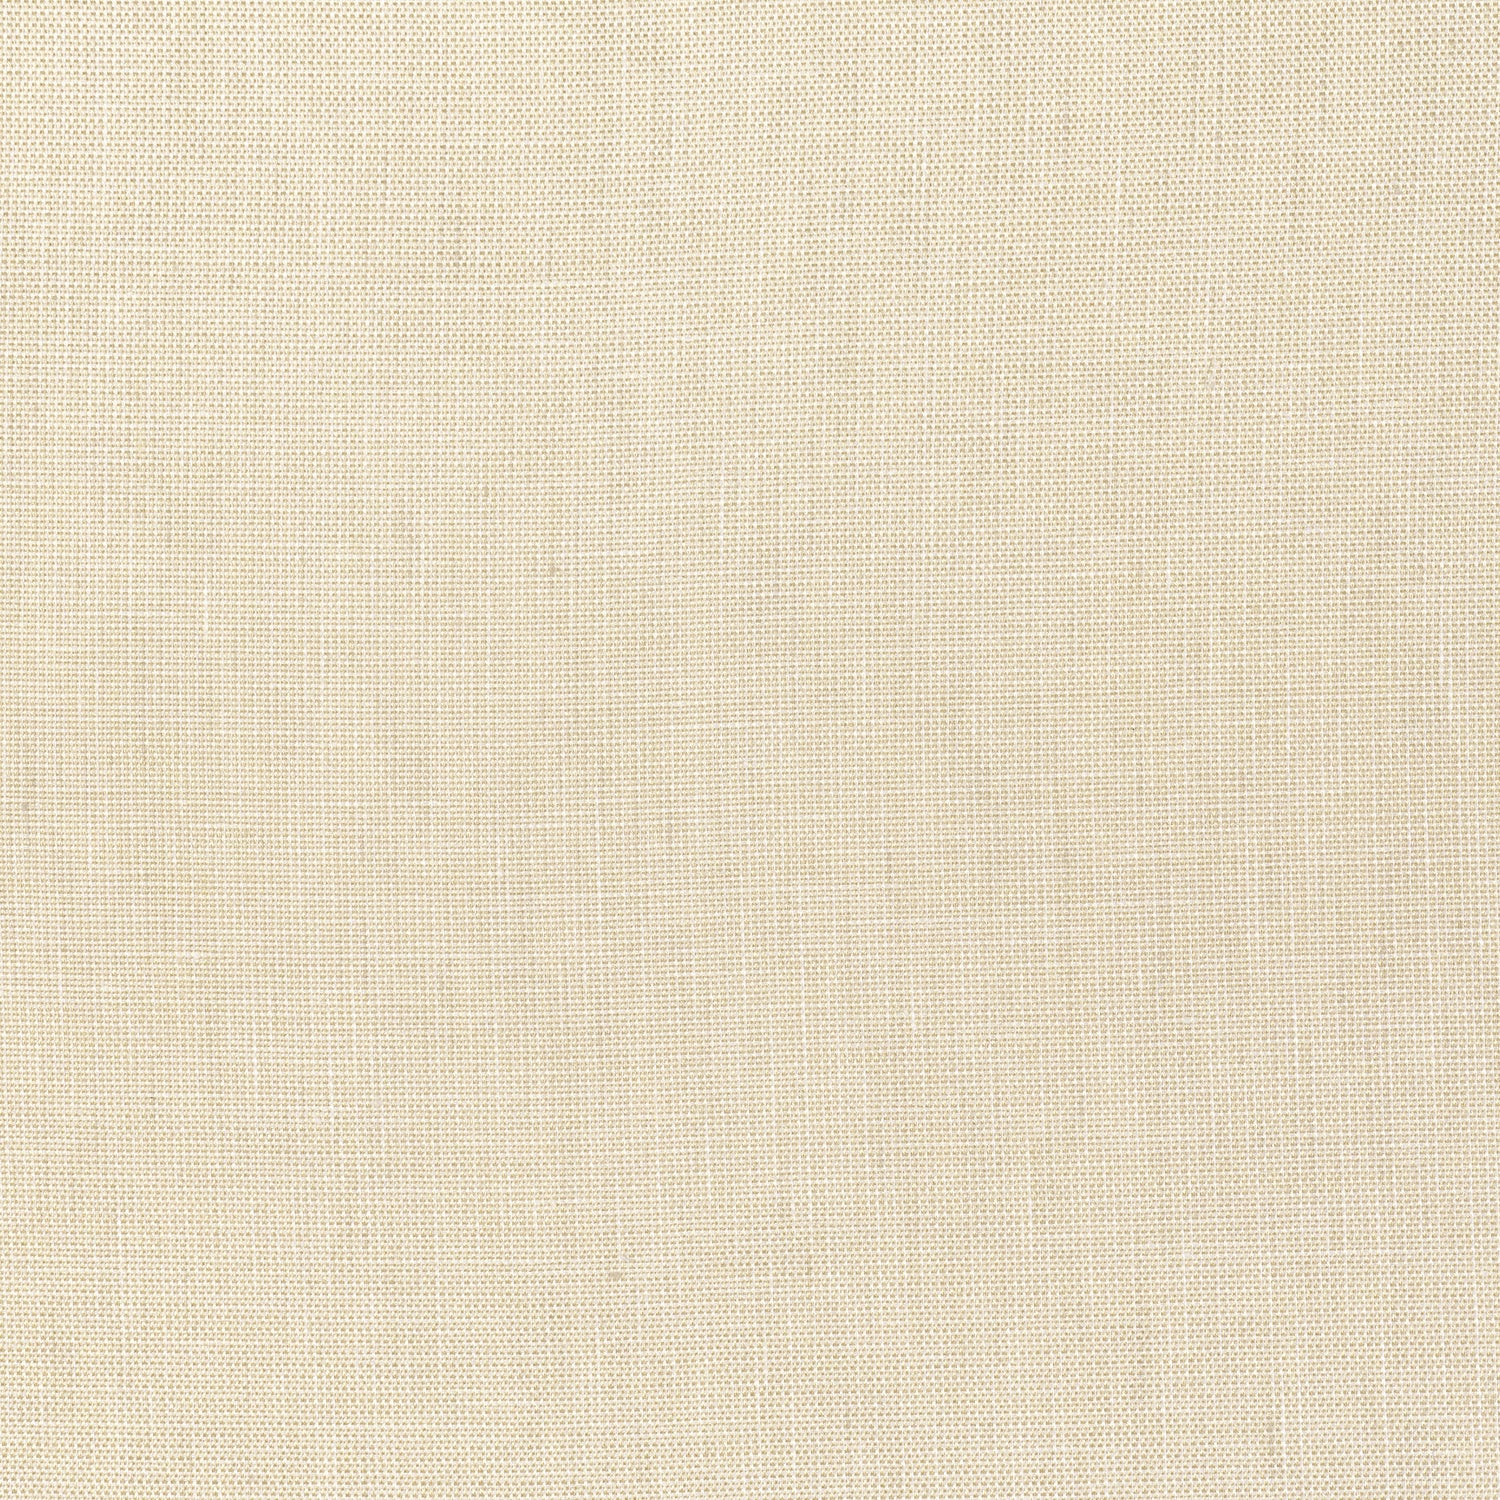 Skye Linen fabric in cashmere color - pattern number FWW7607 - by Thibaut in the Palisades collection